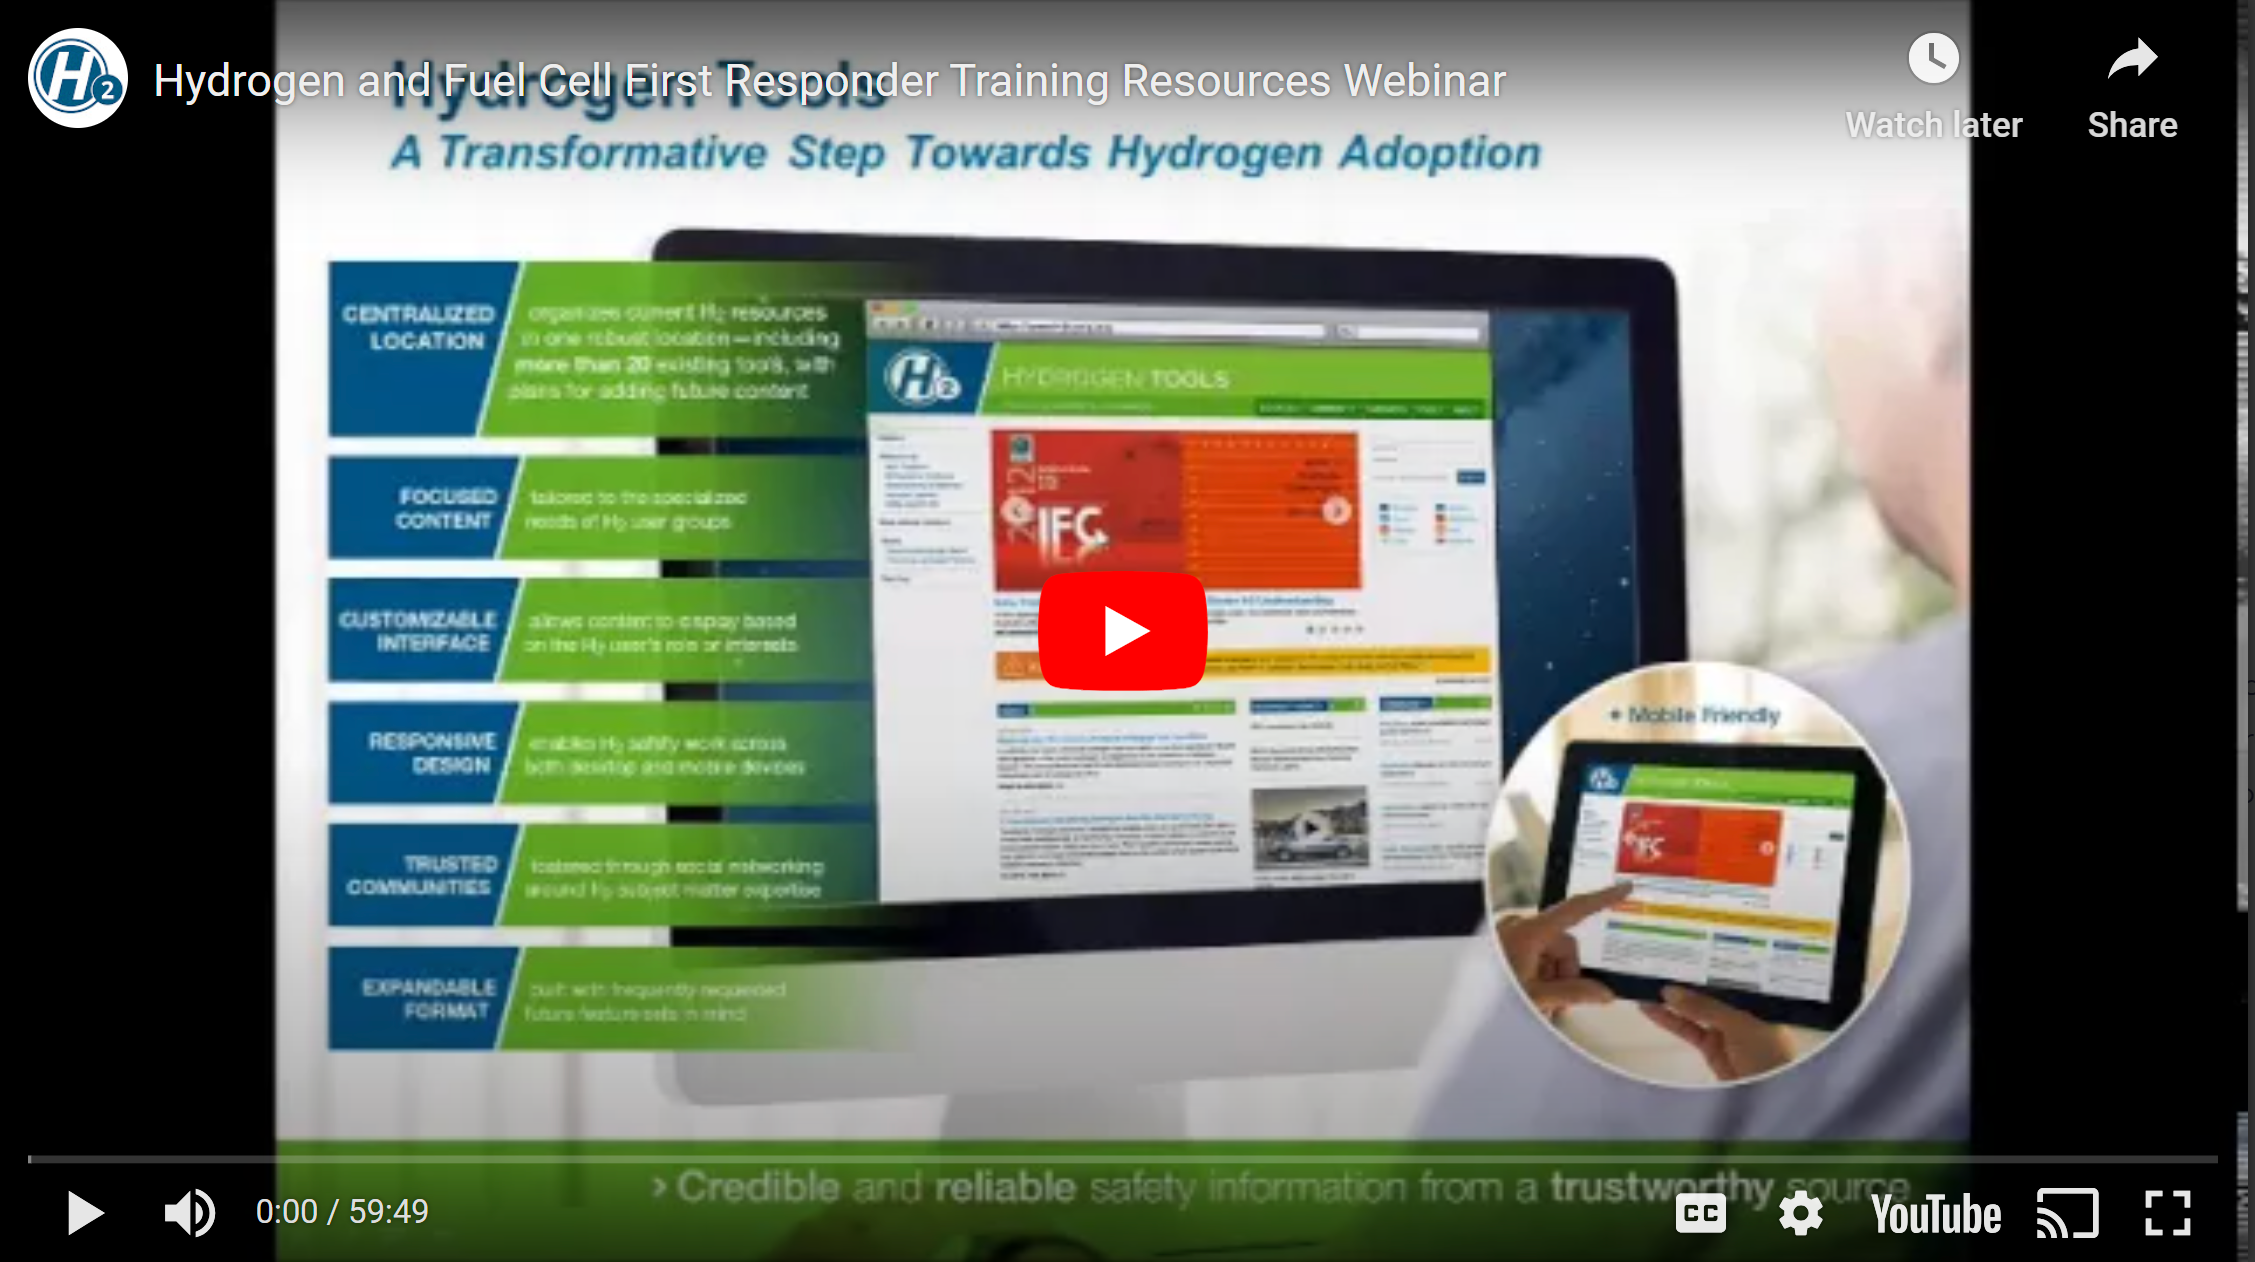 Hydrogen and Fuel Cell First Responder Training Resources Webinar